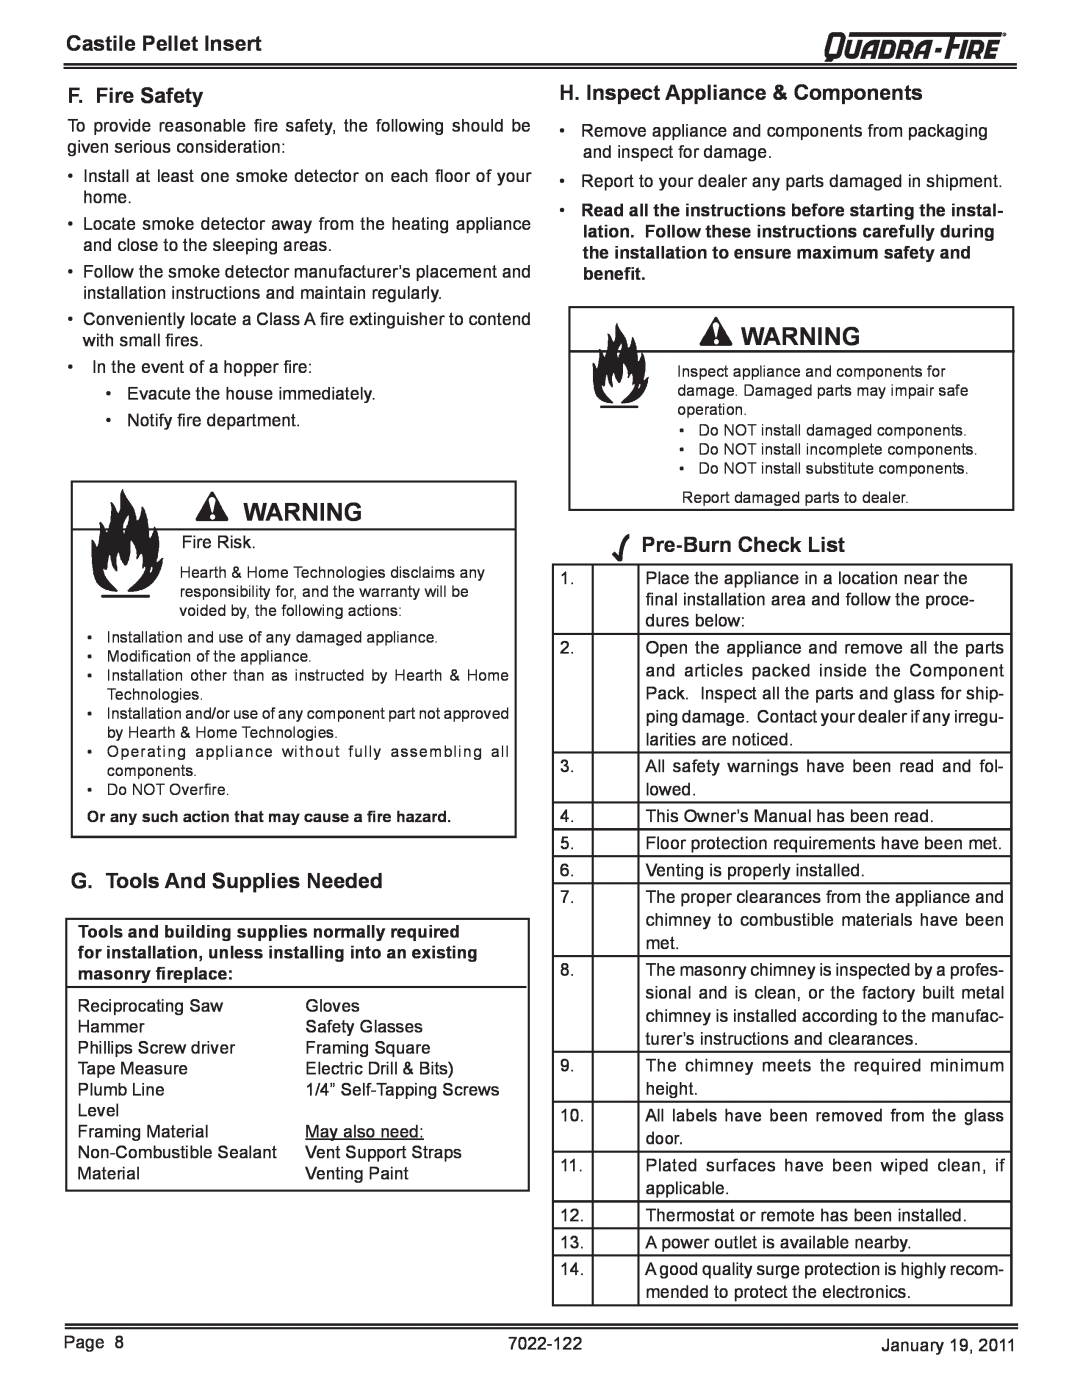 Quadra-Fire CASTILEI-MBK owner manual F. Fire Safety, H. Inspect Appliance & Components, G. Tools And Supplies Needed 